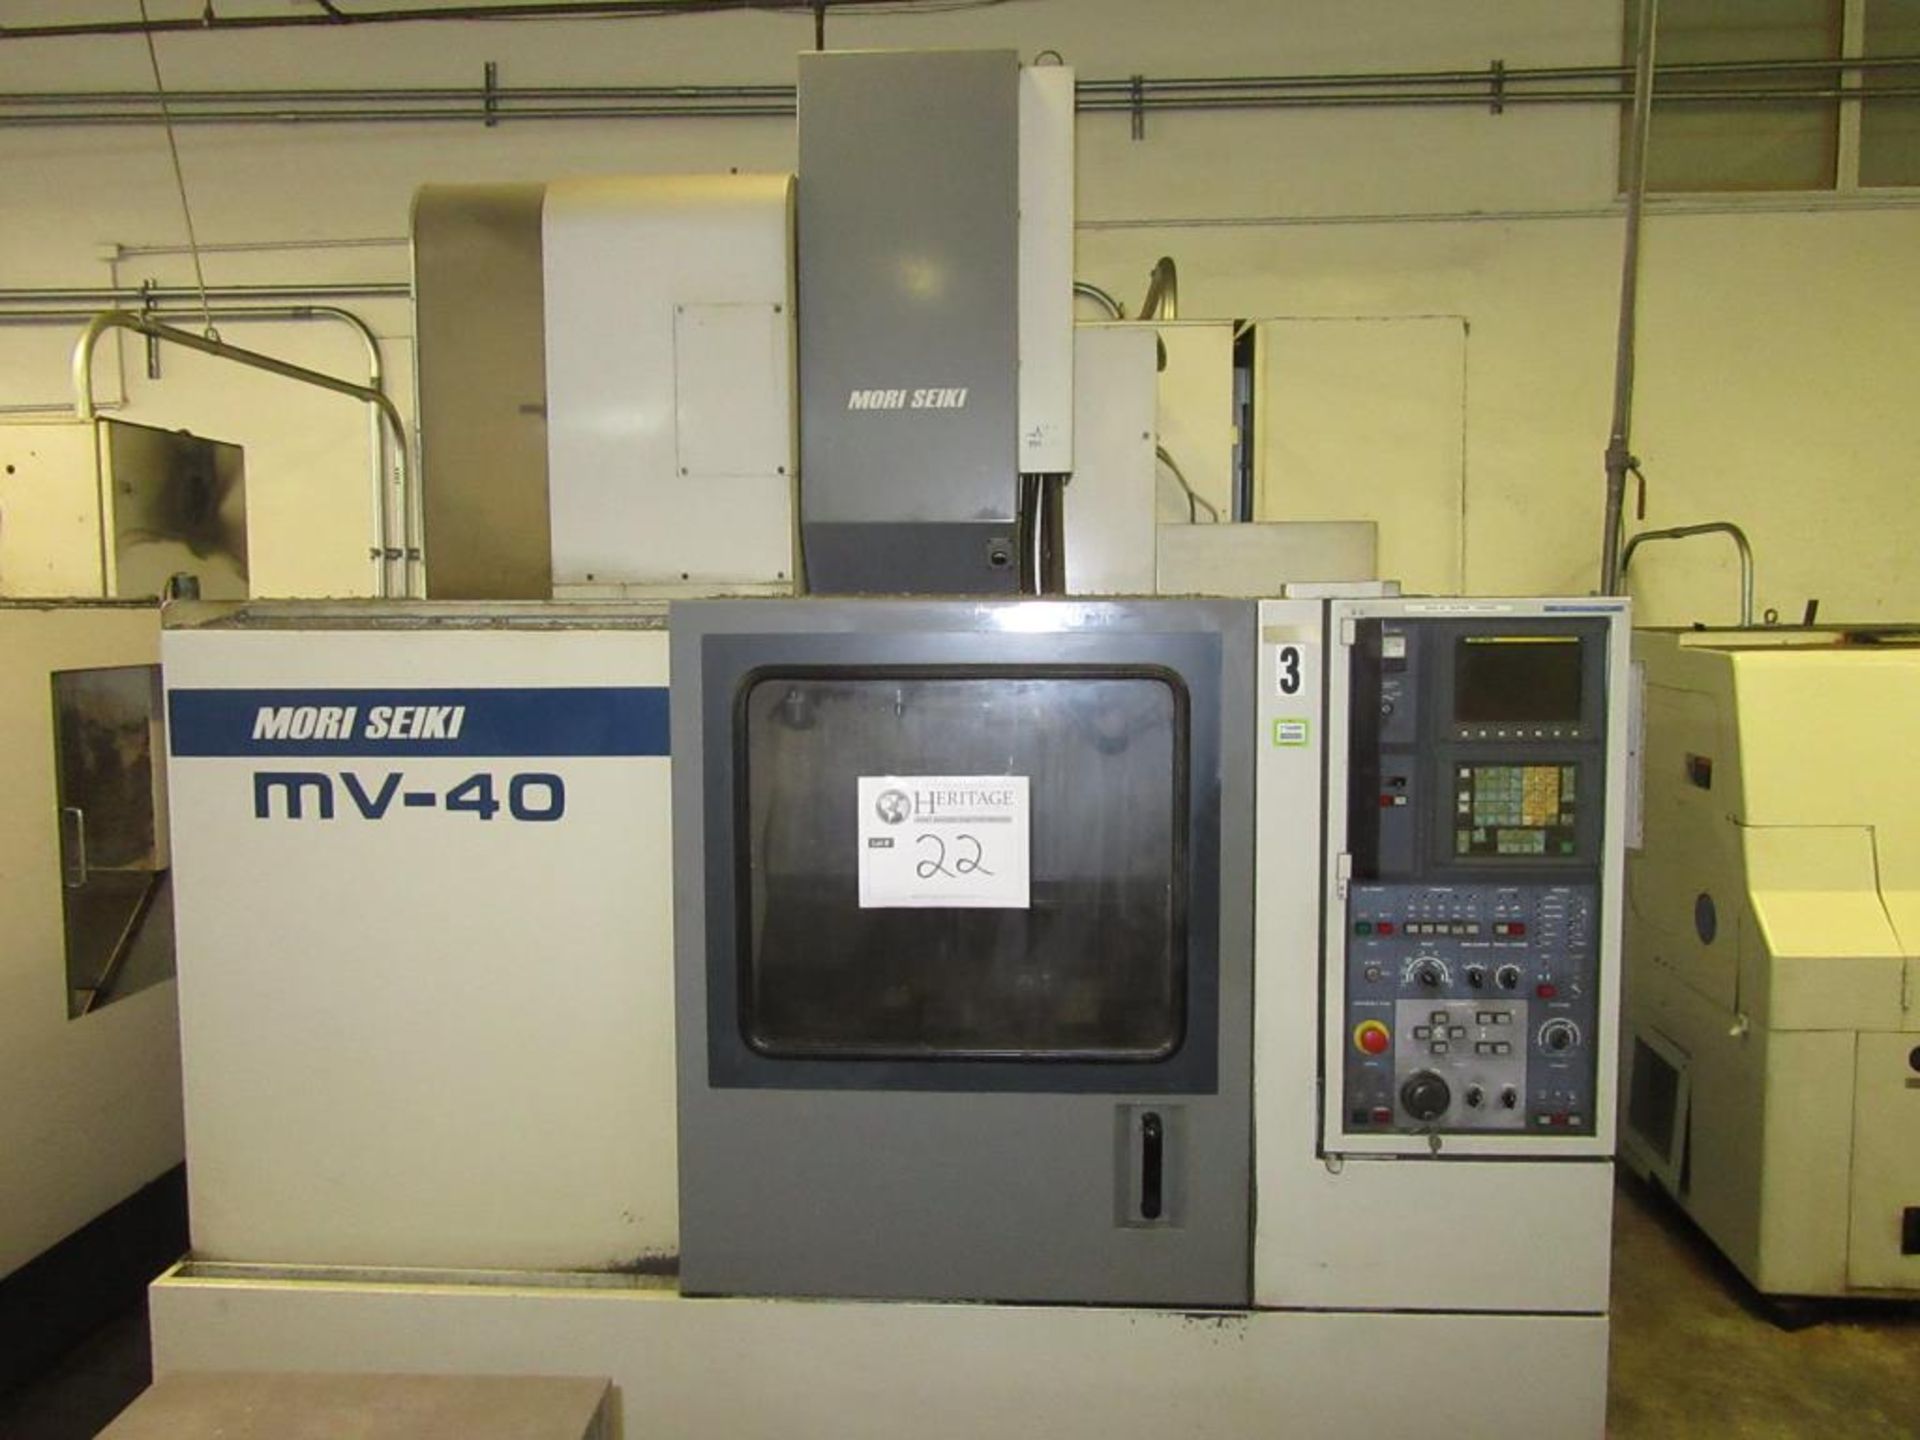 Mori Seiki MV-40B 1991 - CNC Vertical Machining Center with MF-M4 3-Axis Control Panel, Table Size